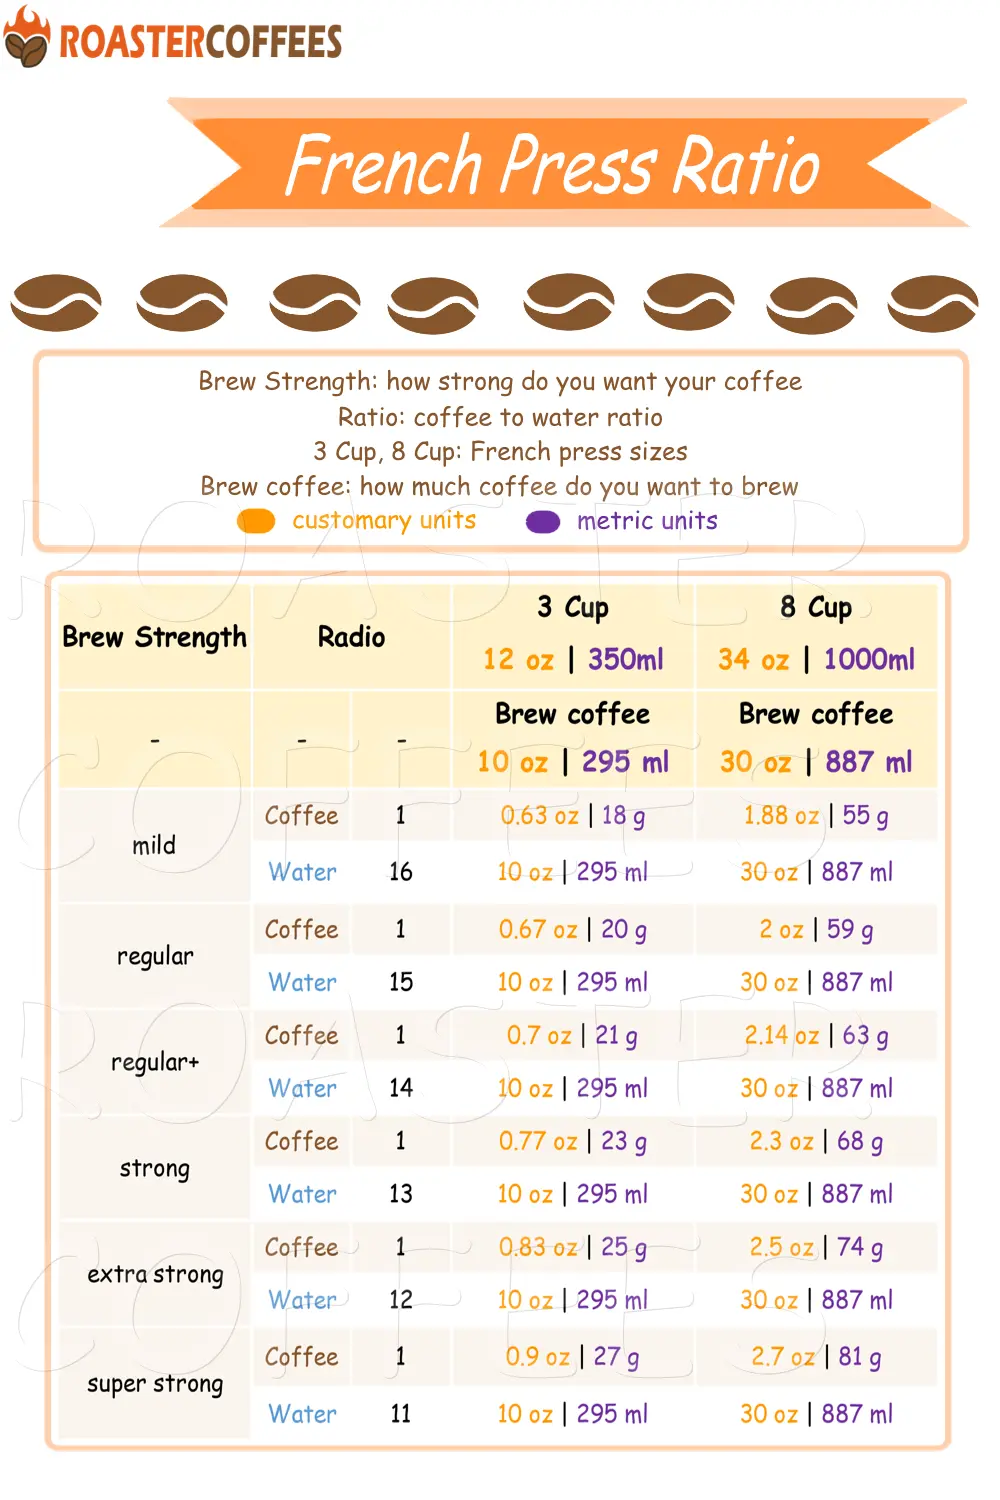 The chart shows the coffee to water ratio of the 3cup and 8cup press